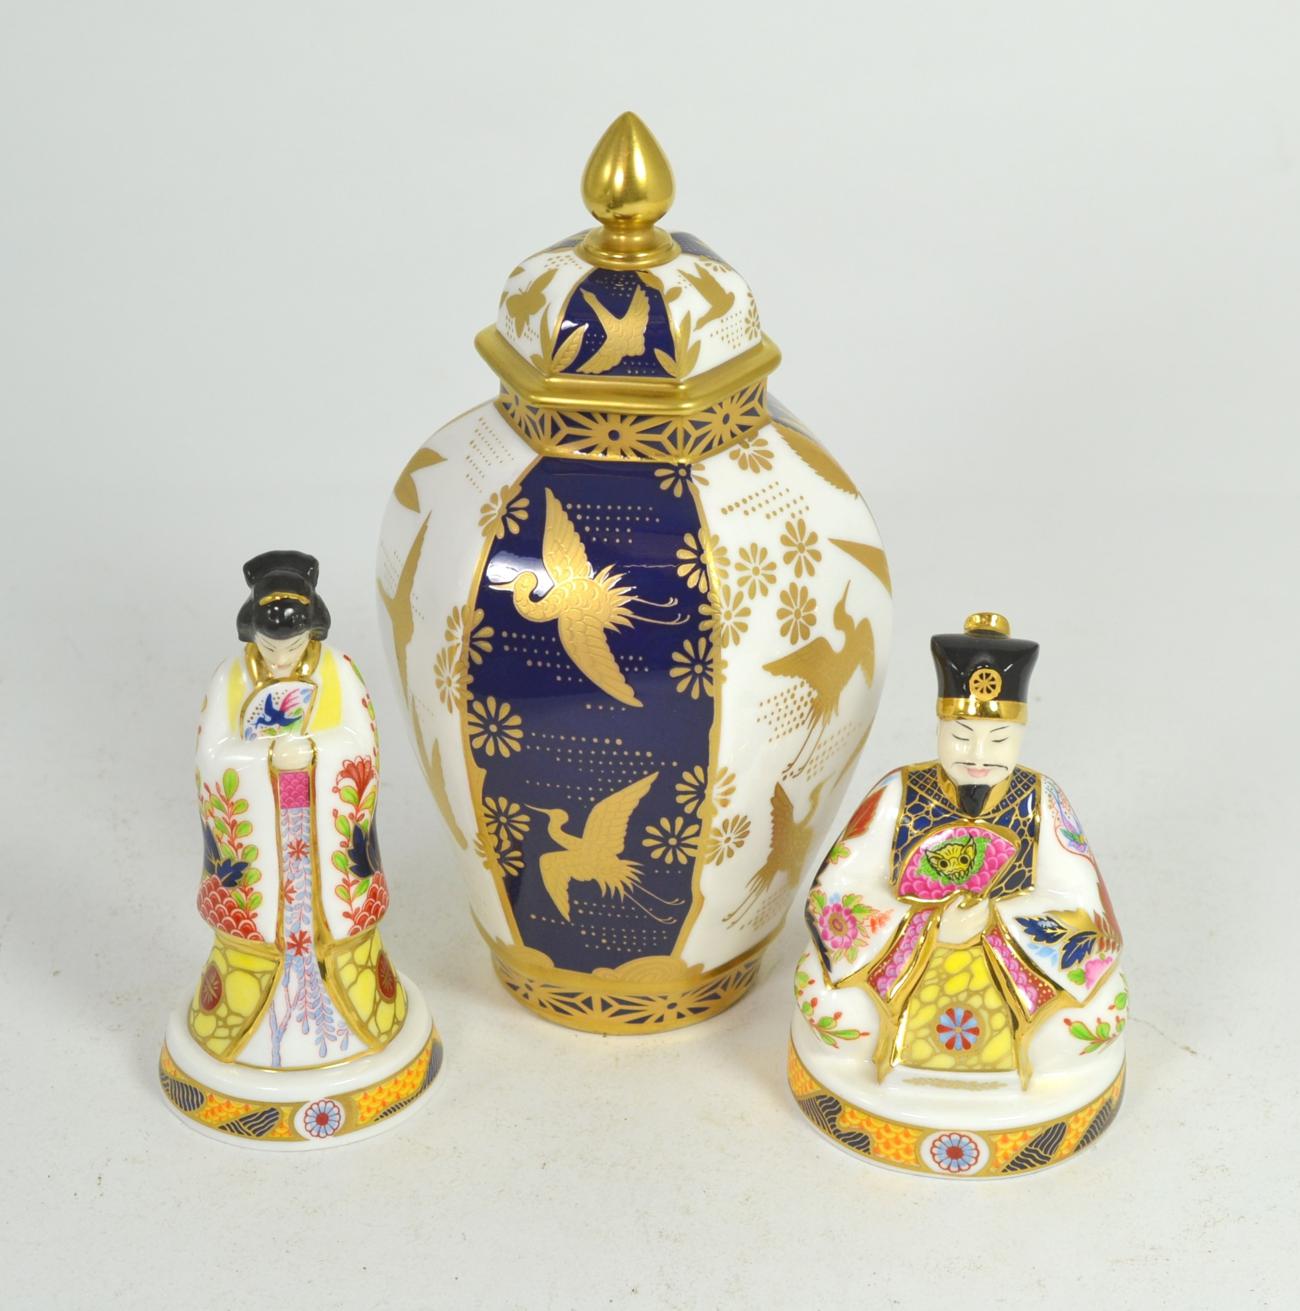 Two modern Royal Worcester figures, emperor and empress together with a modern Royal Worcester